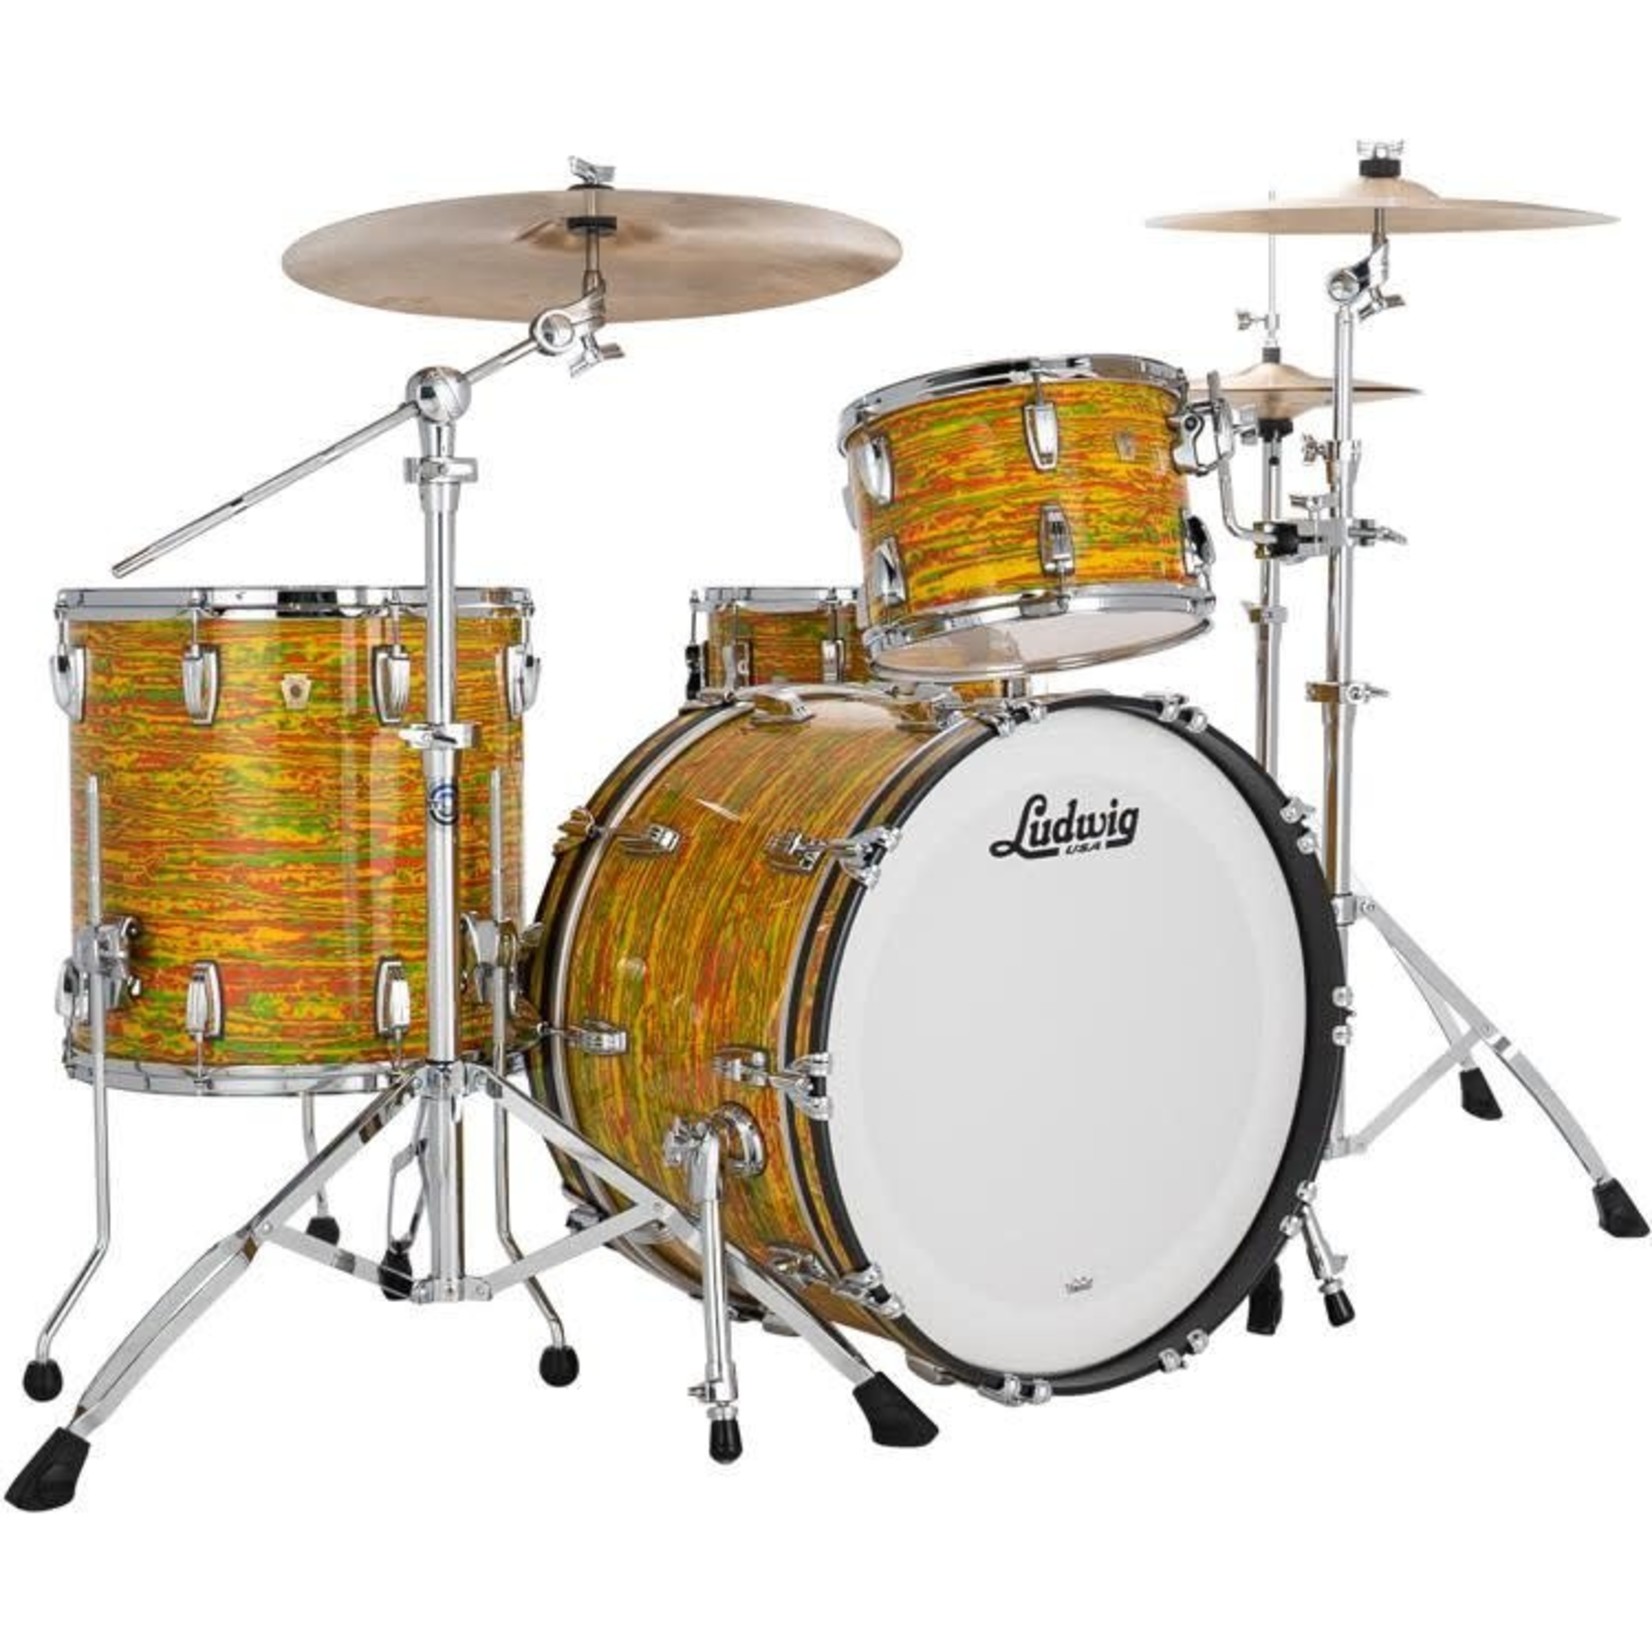 Ludwig Ludwig Classic Maple FAB 3-Piece Shell Pack 13/16/22 (Citrus Mod)